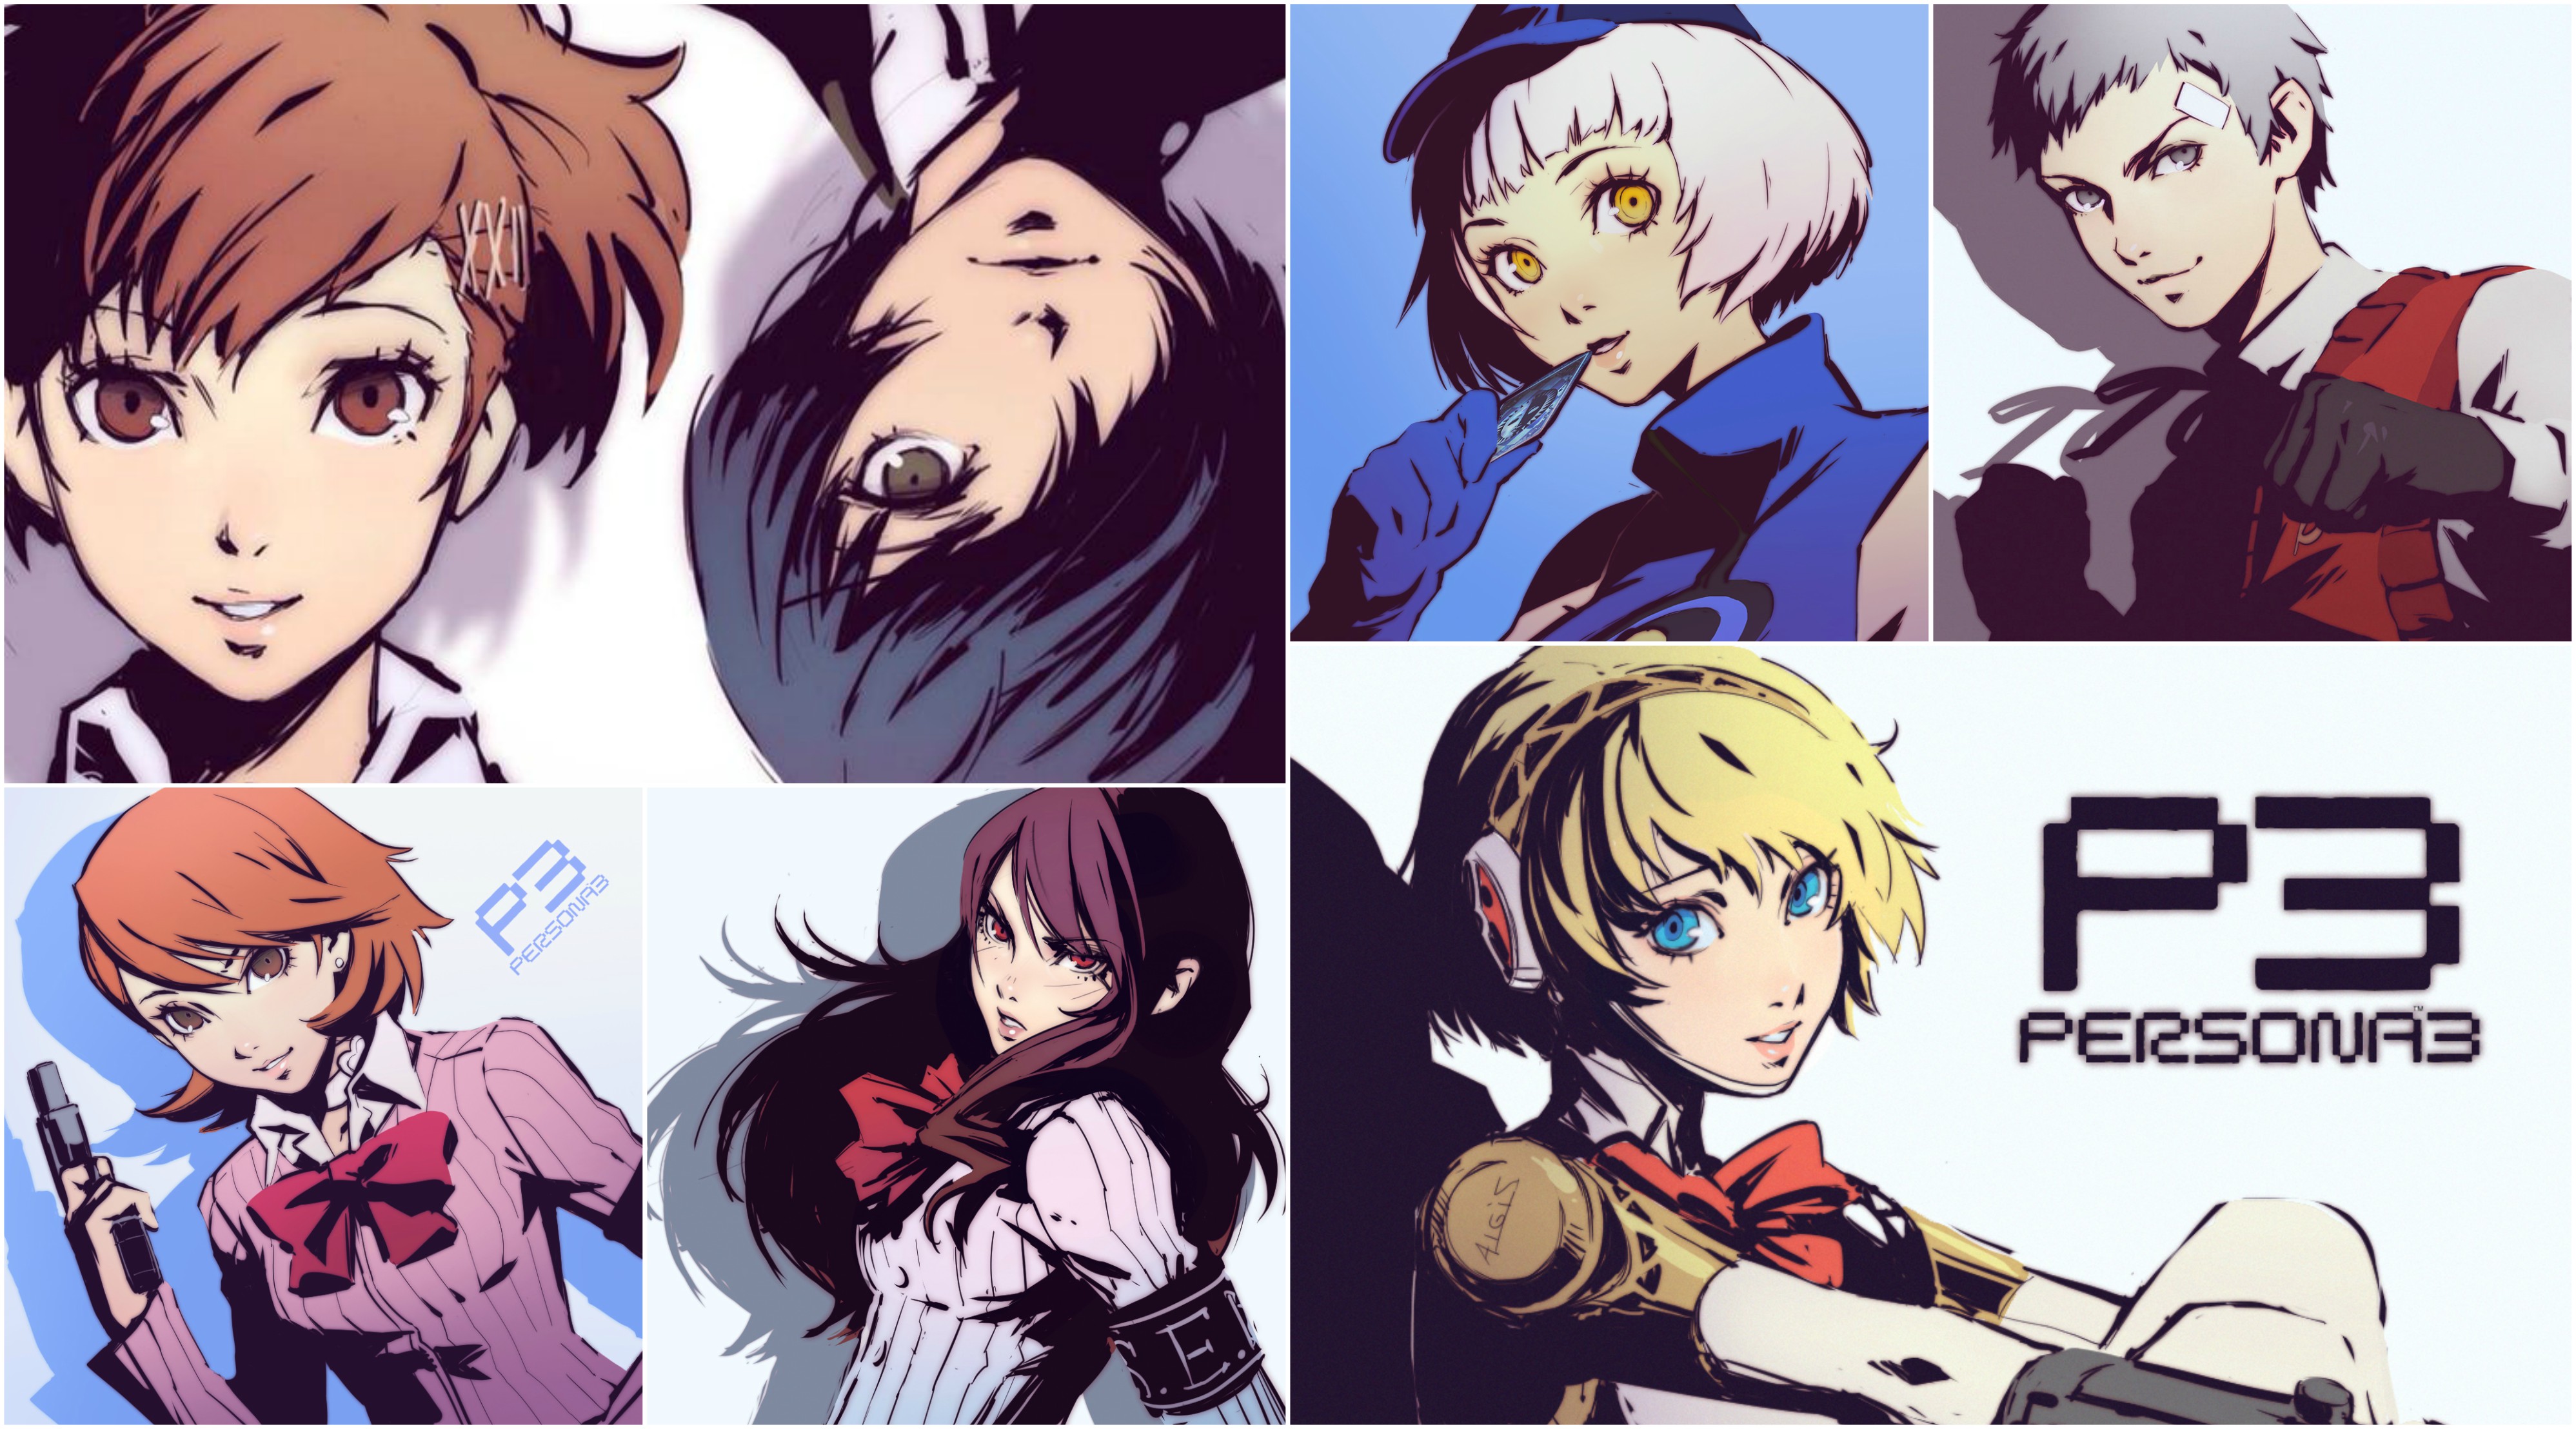 P3 Wallpapers